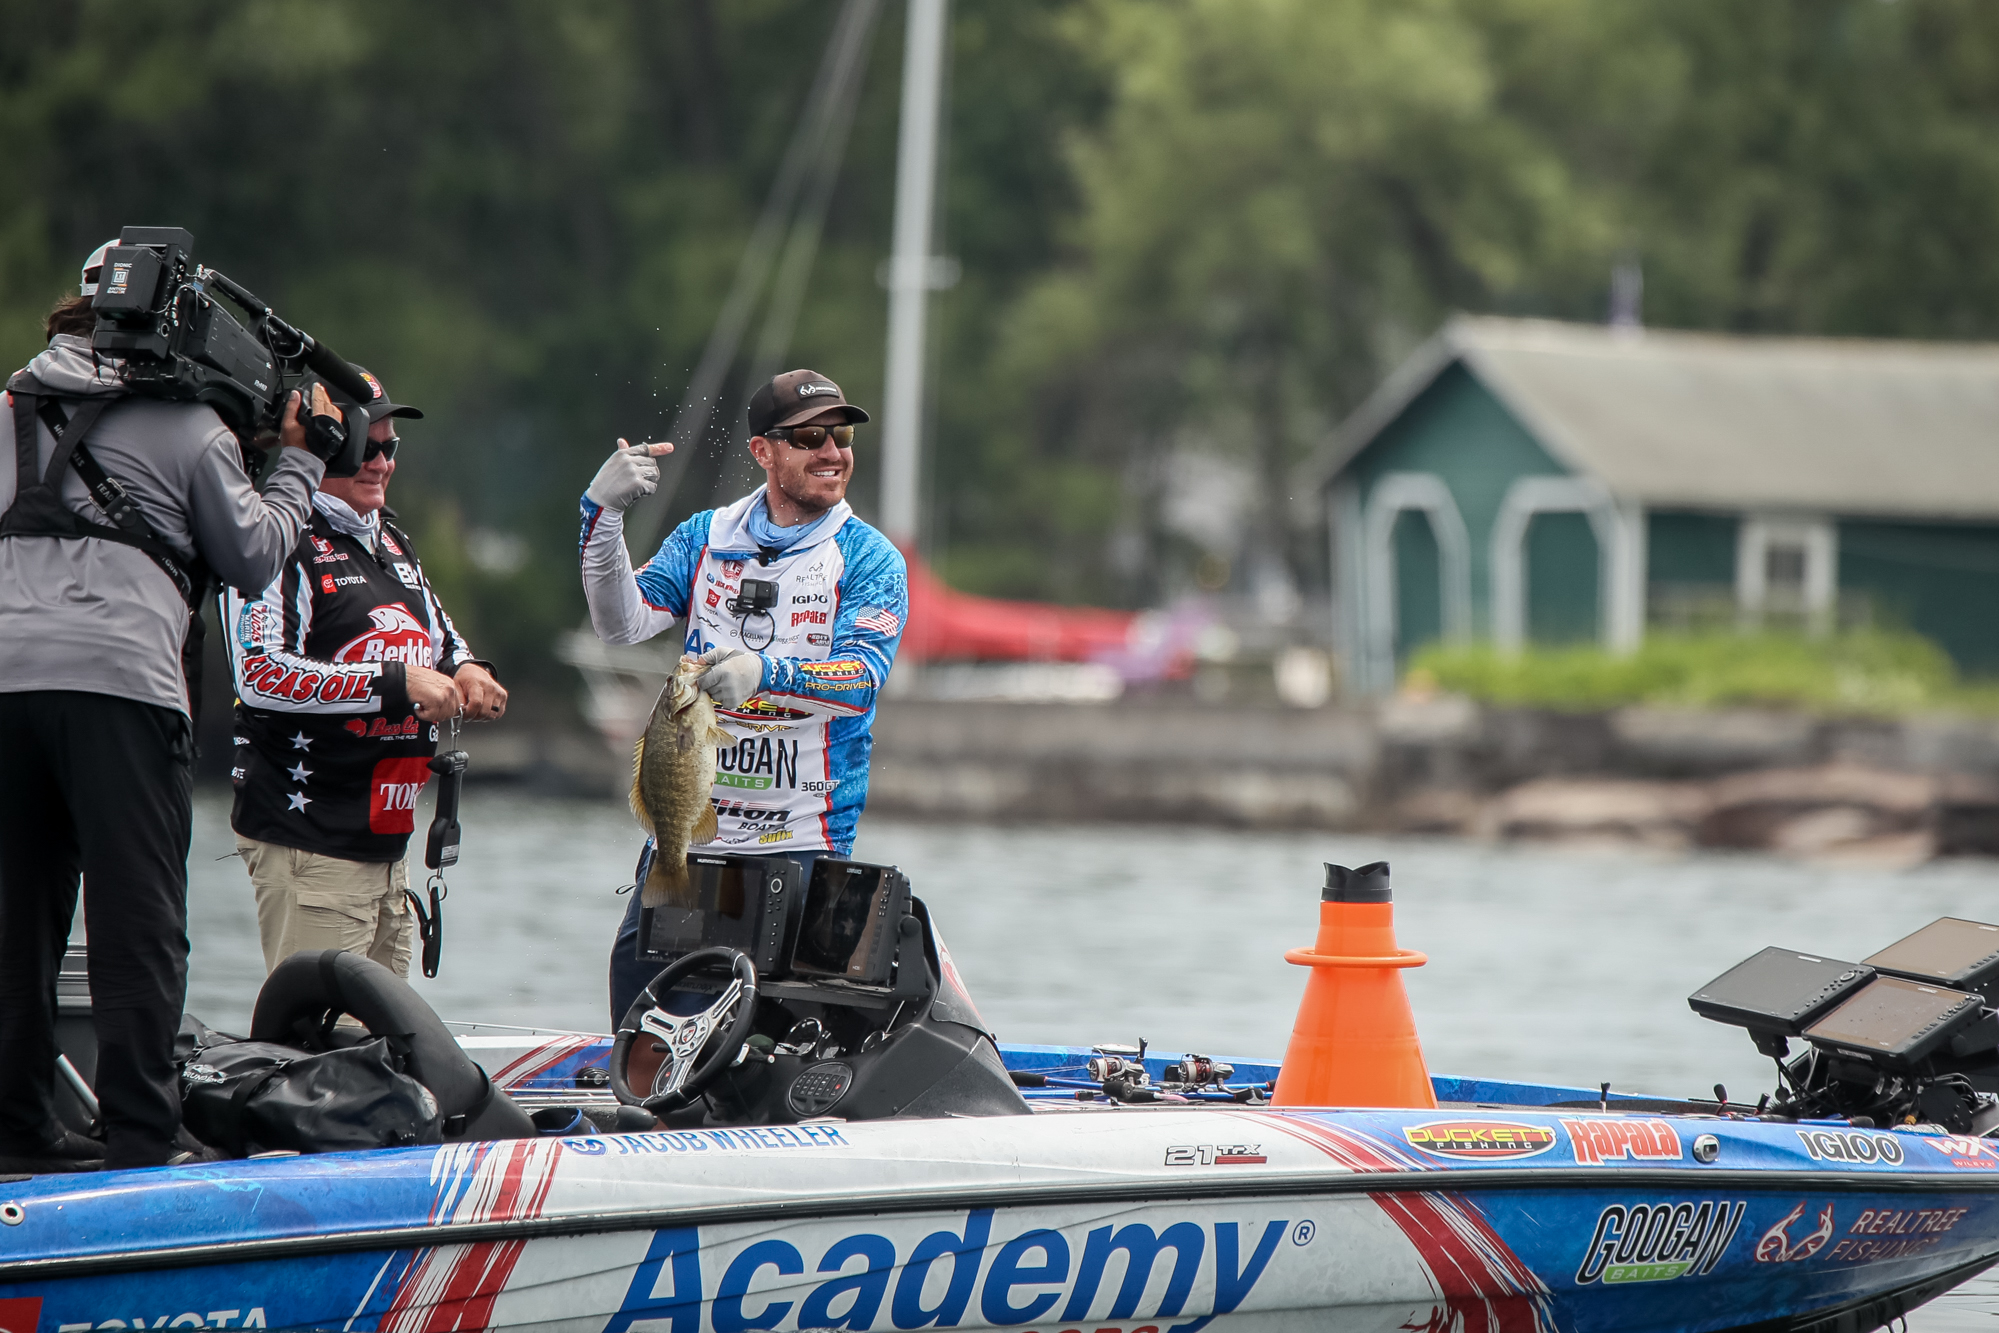 Angler smashes bass pro tour record on Pelican Lake - The Timberjay